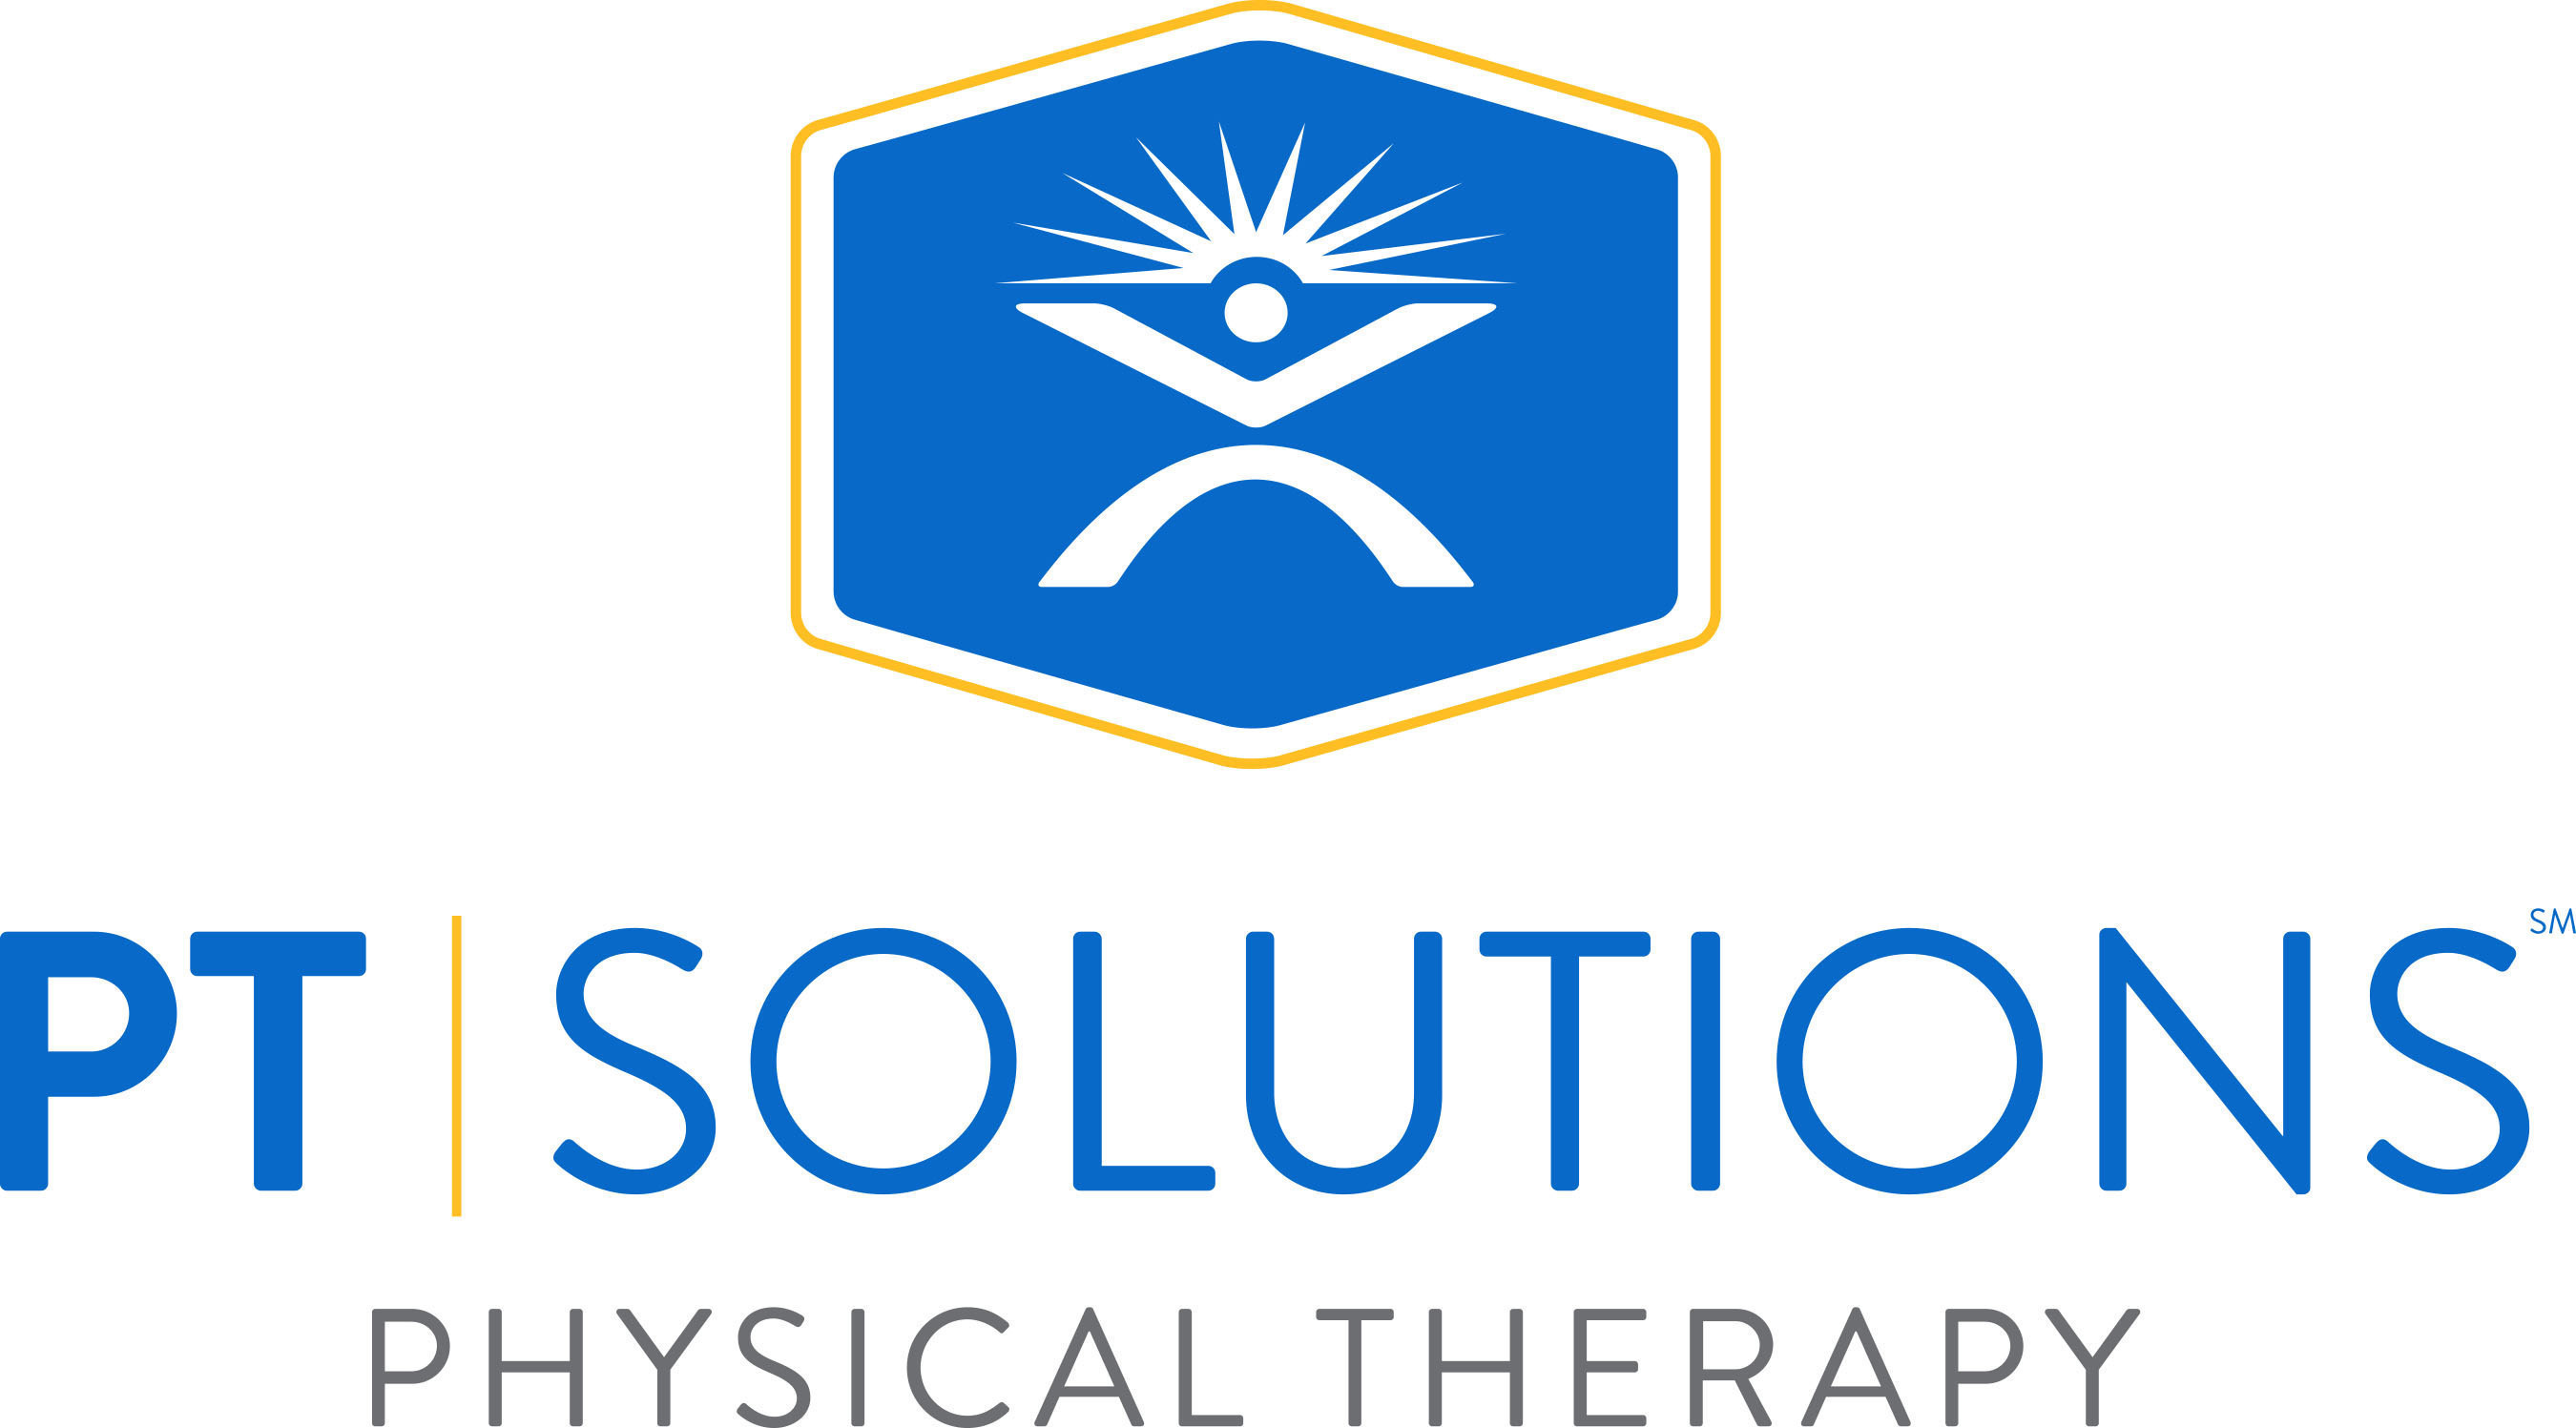 PT Solutions therapists specialize in advanced clinical treatment that uses the latest research to make their patients unstoppable.